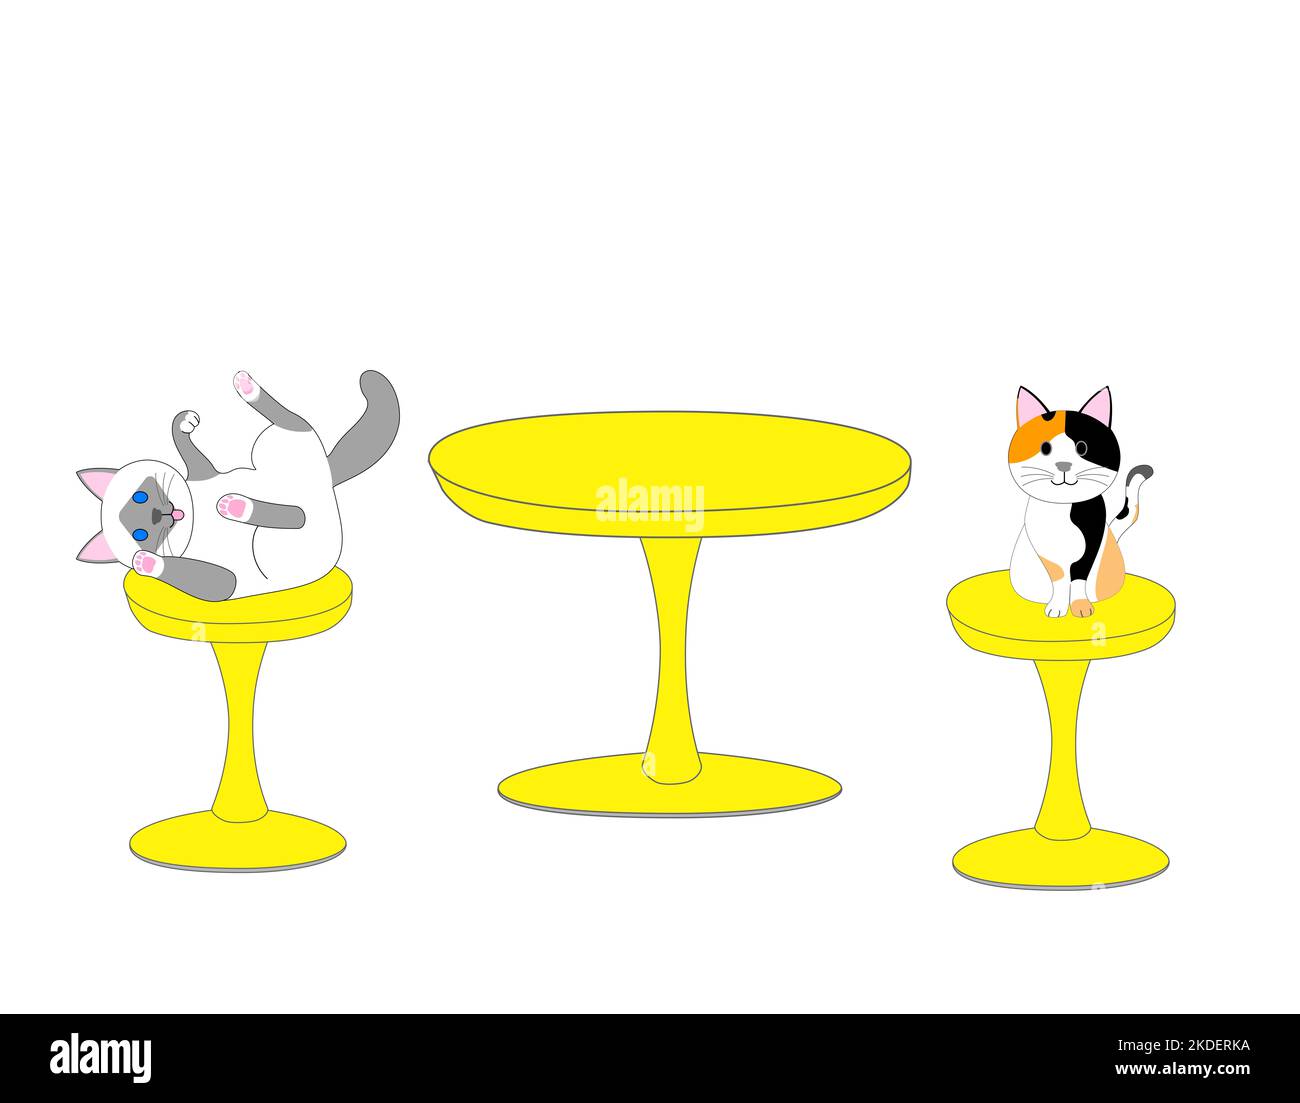 cat cafe with cats with sixtie’s style table and stools. Stock Photo